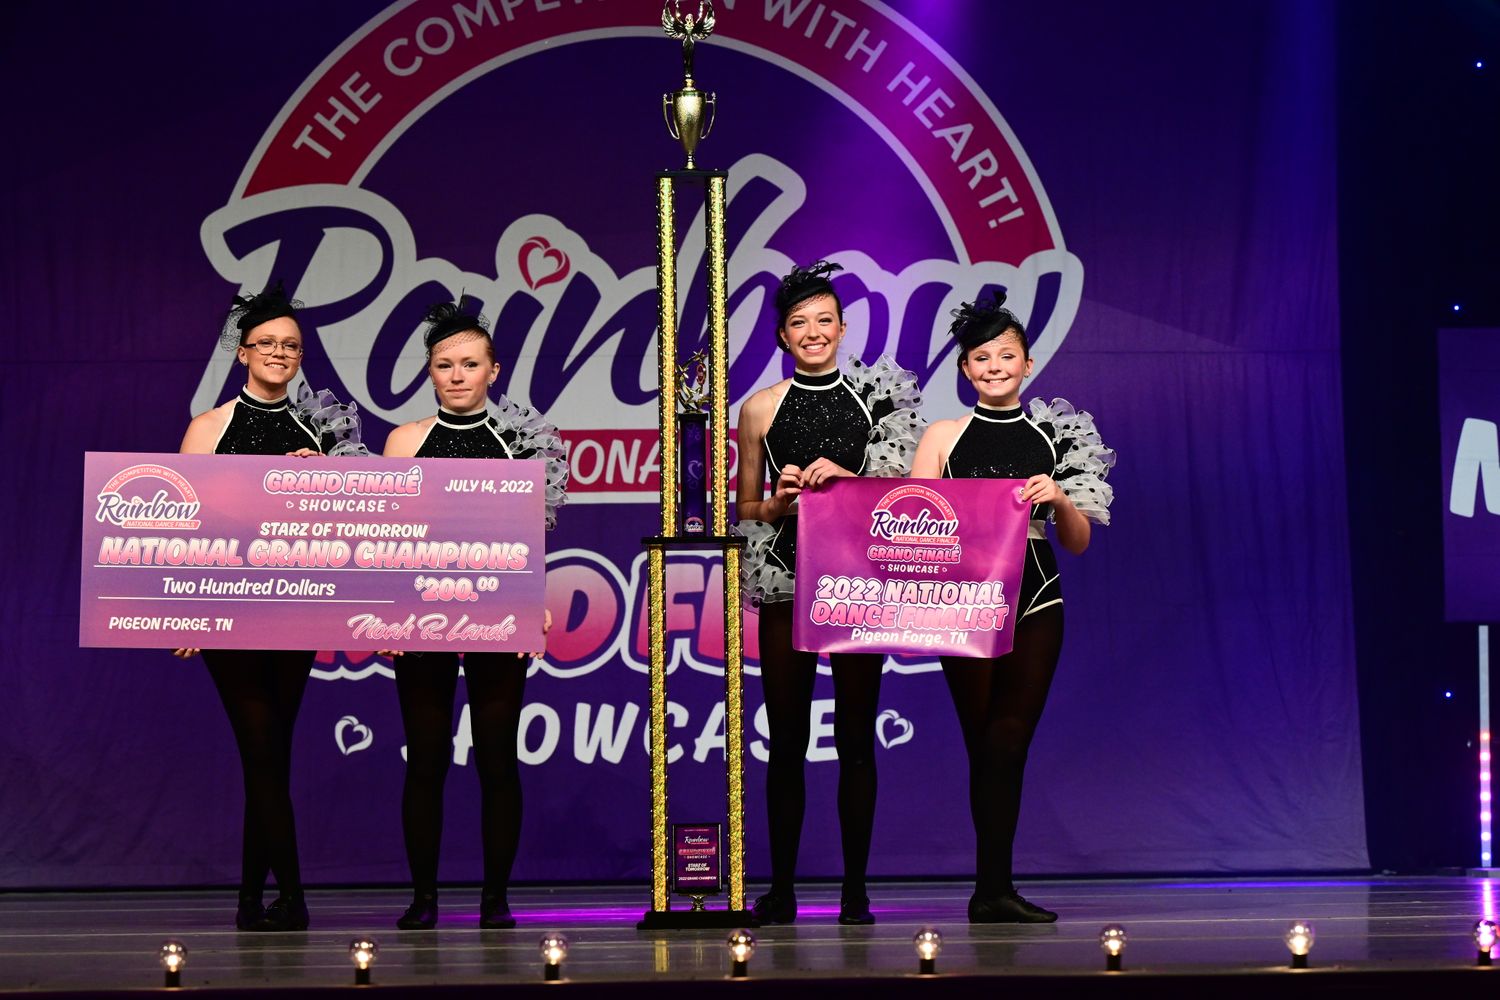 Pigeon Forge, TN Grand Finale - 7/14/2022